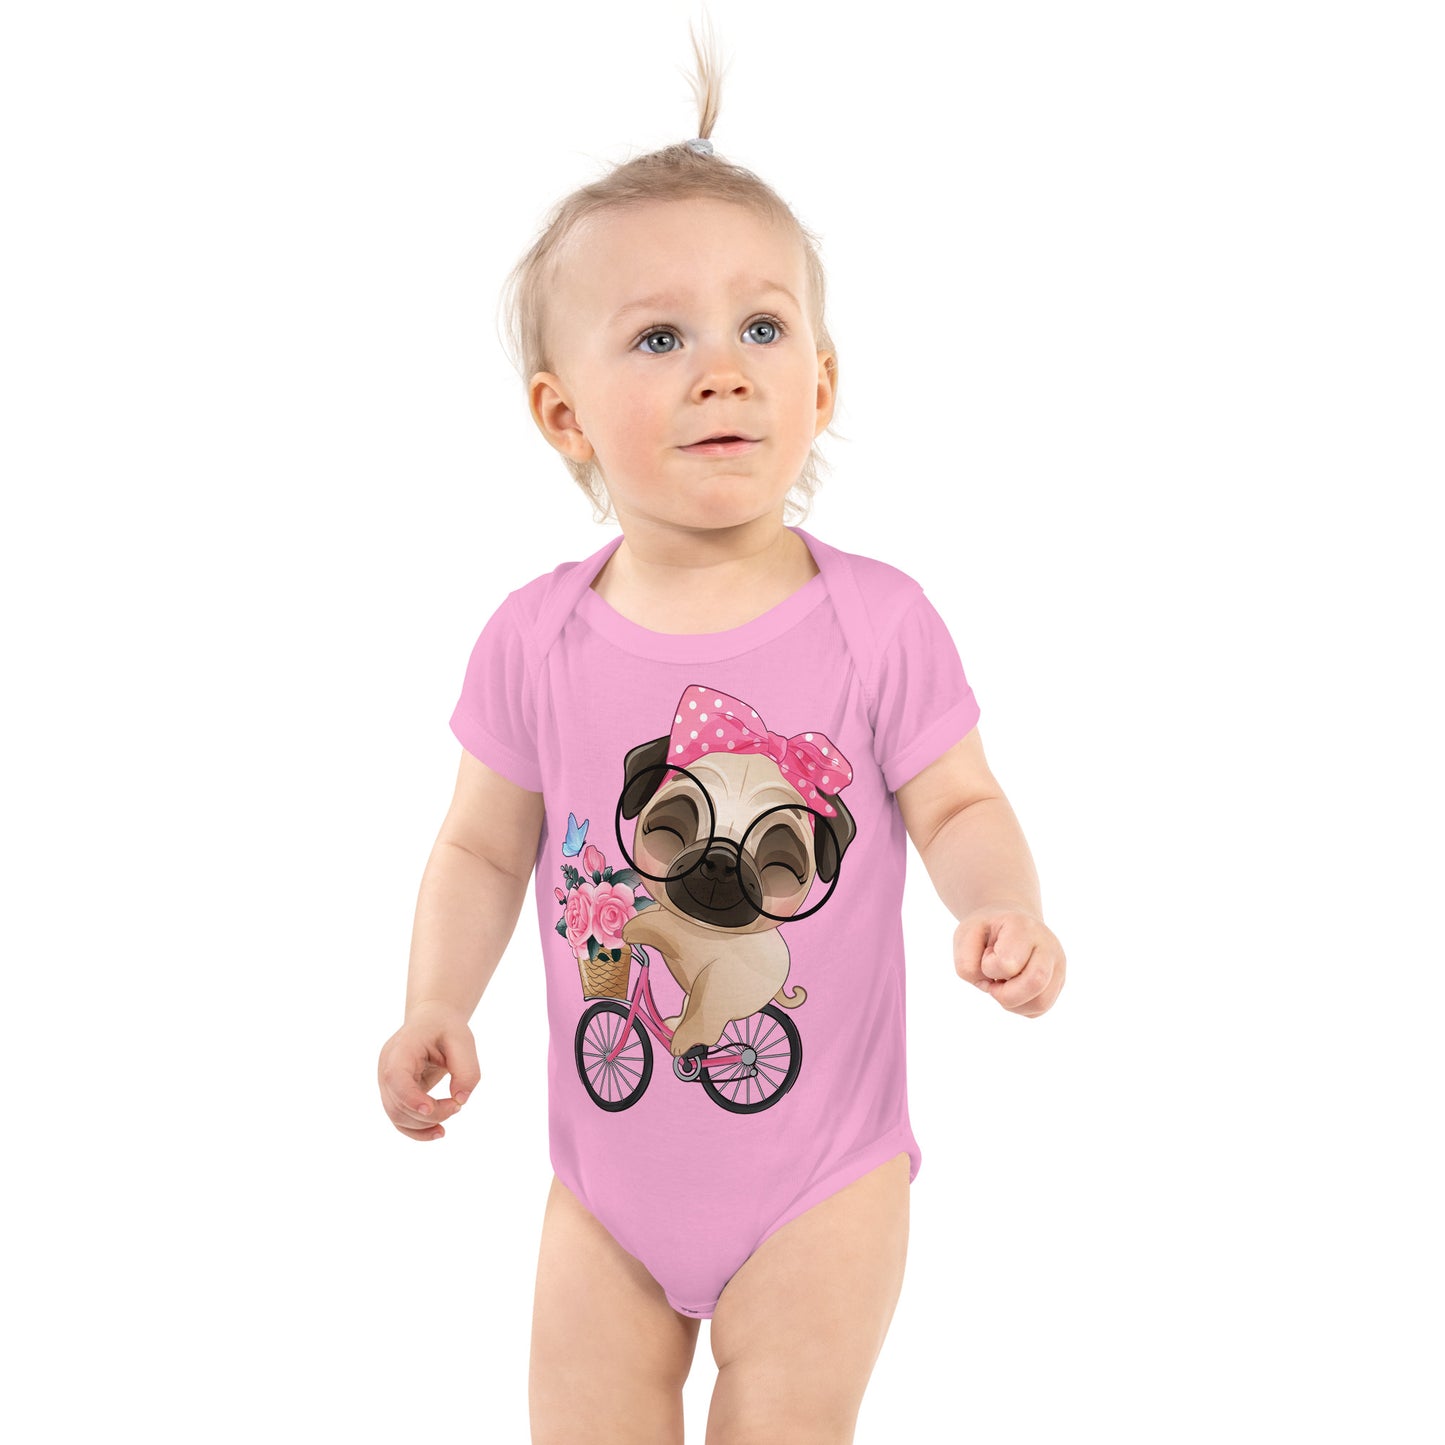 Cute Little Pug Dog Riding Bicycle Bodysuit, No. 0364